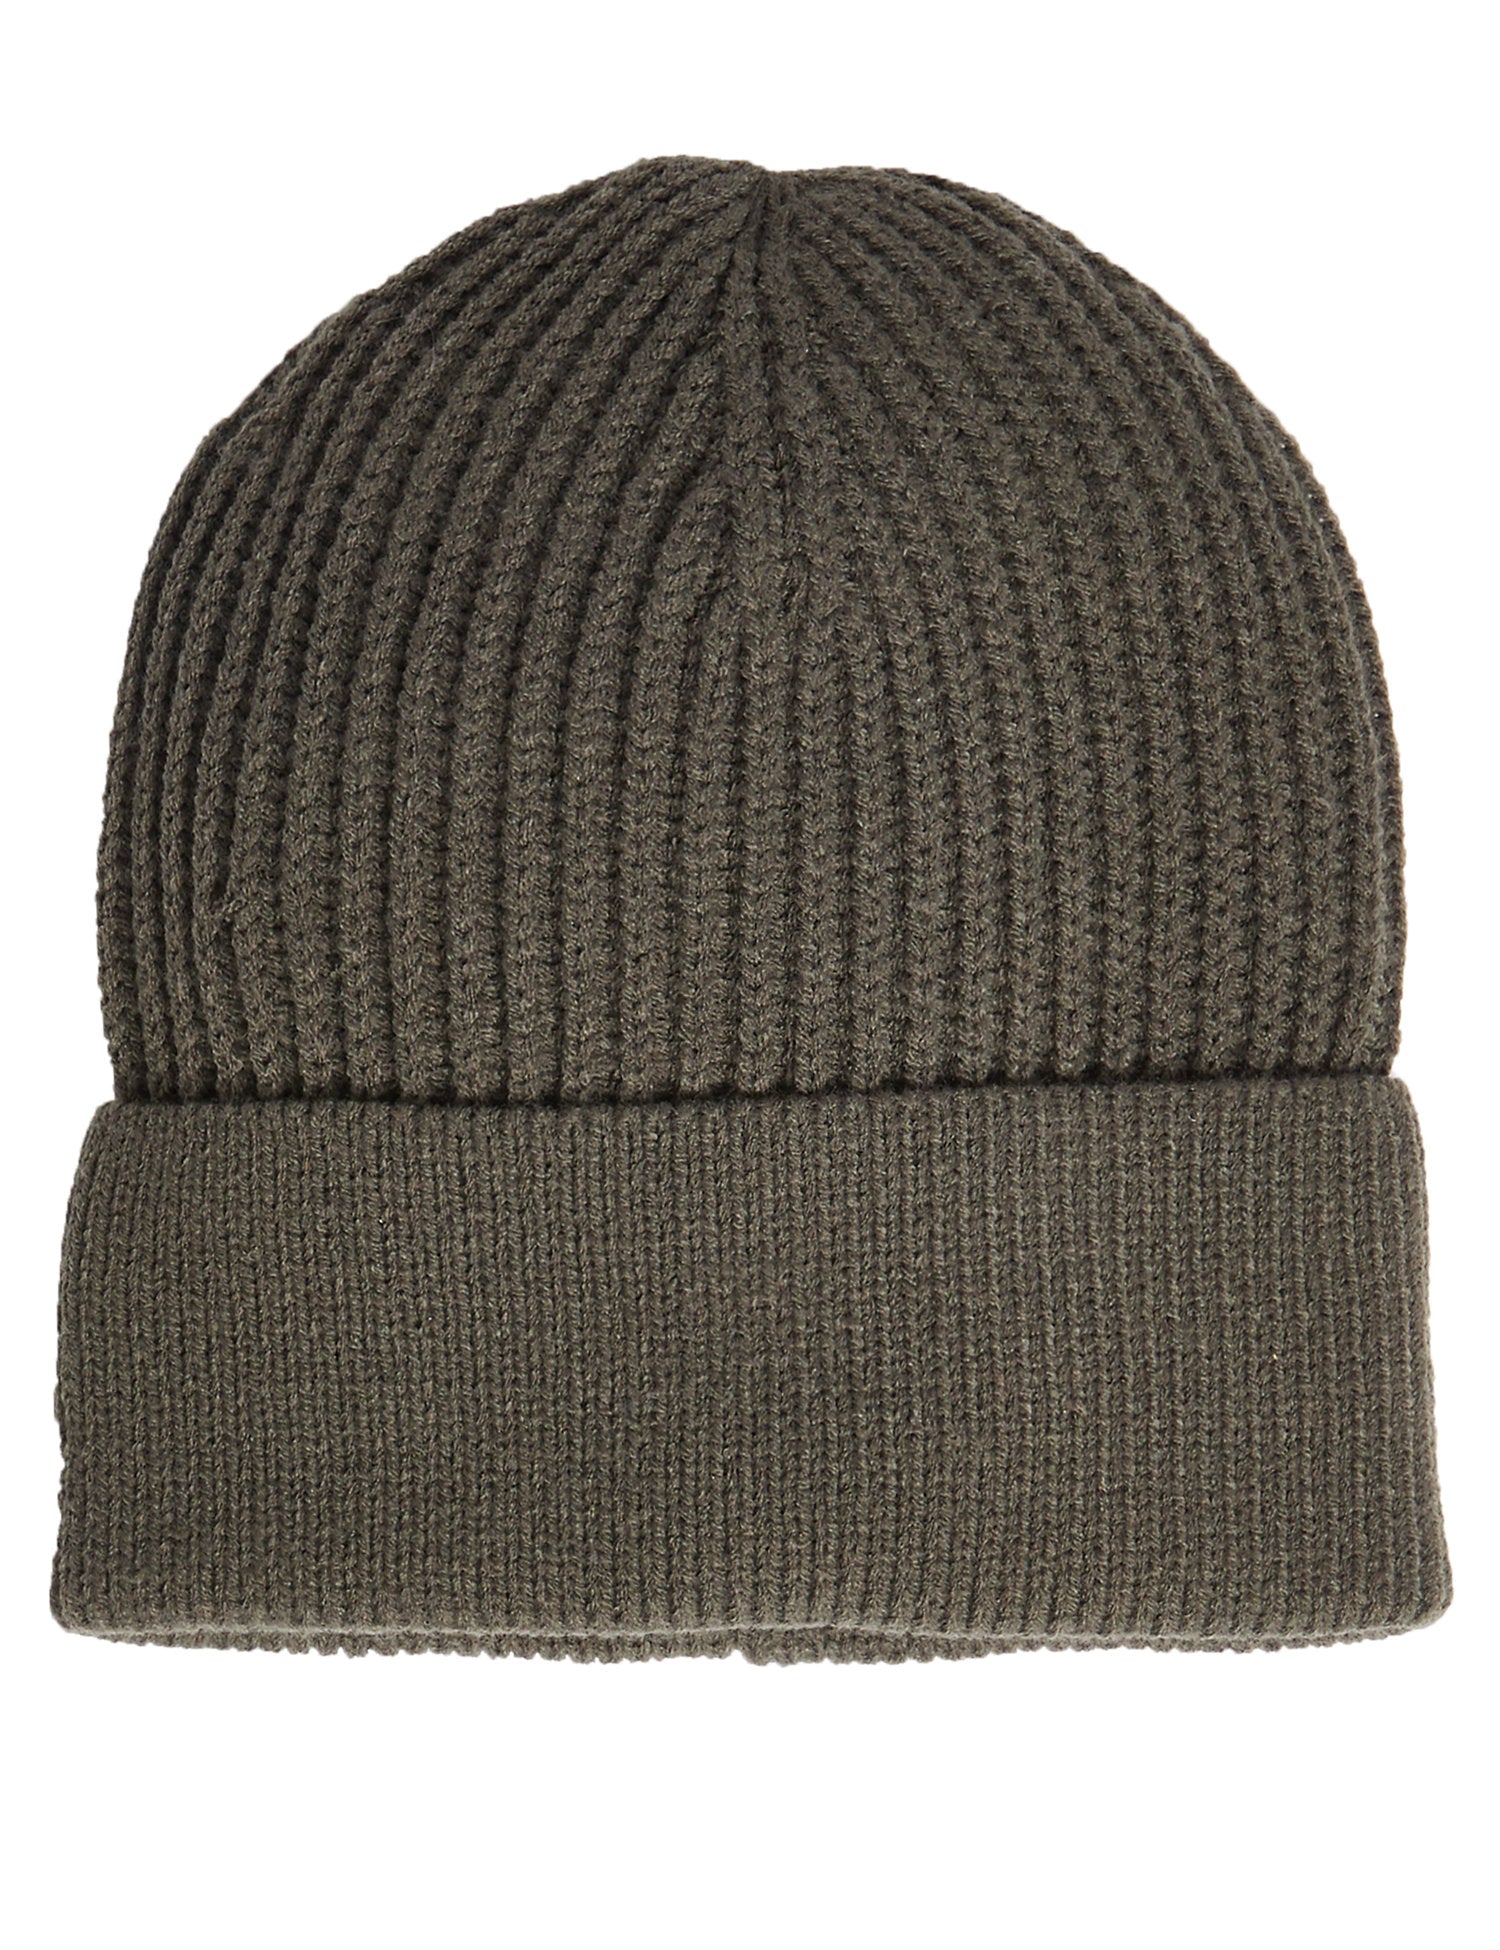 Knitted Beanie Hat with Thermowarmth